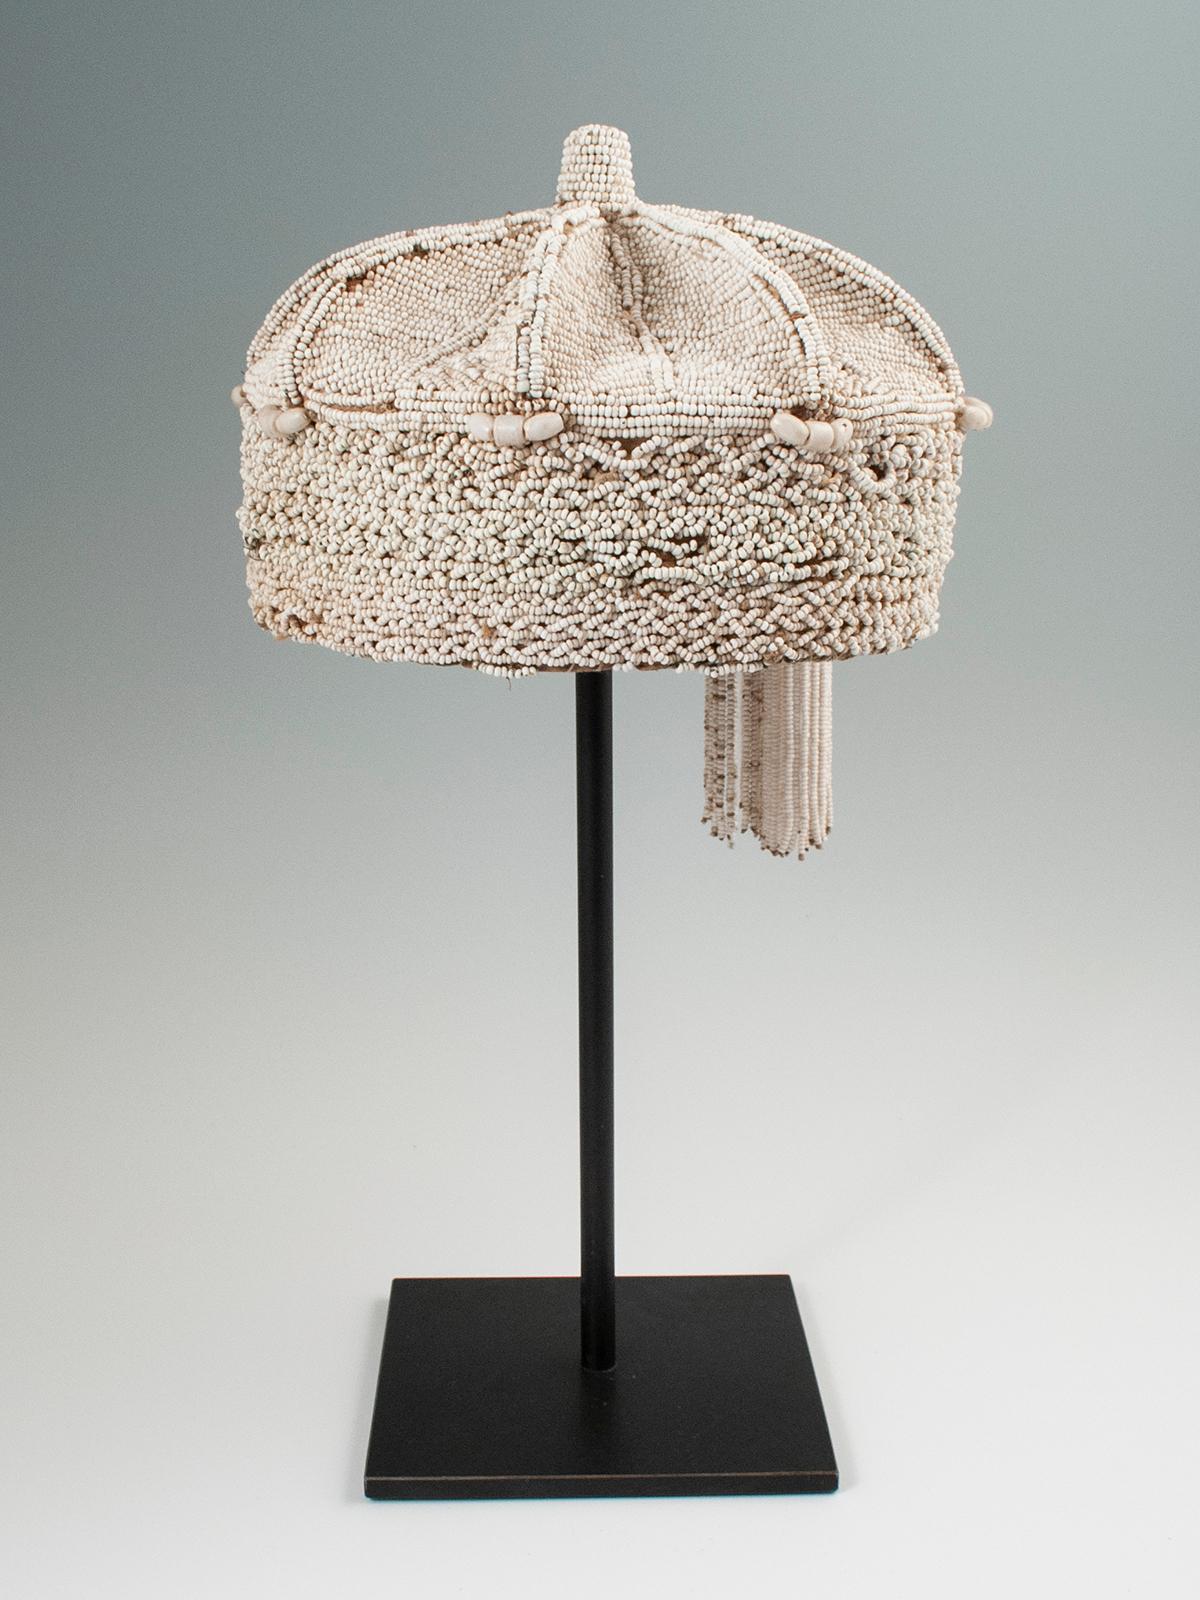 Mid-20th century tribal white beaded crown, Yoruba people, Nigeria

A lovely example of a chief's white beaded crown with two tassels hanging on one side, some slight bead loss and a small area of bead replacement. Custom base included. Size: 8?